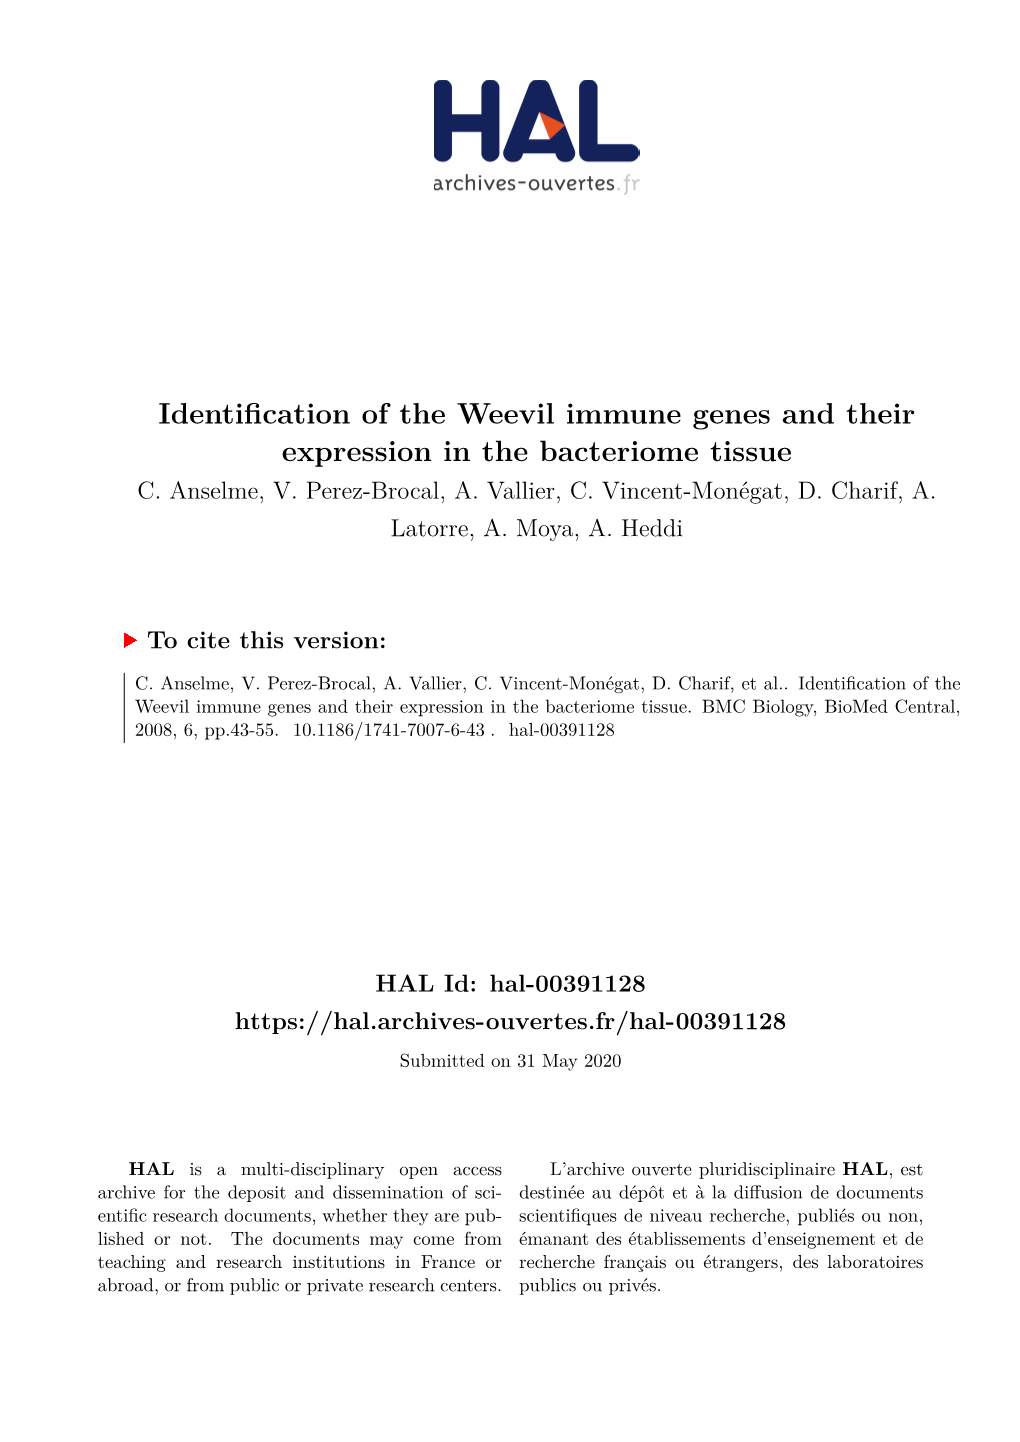 Identification of the Weevil Immune Genes and Their Expression in the Bacteriome Tissue C